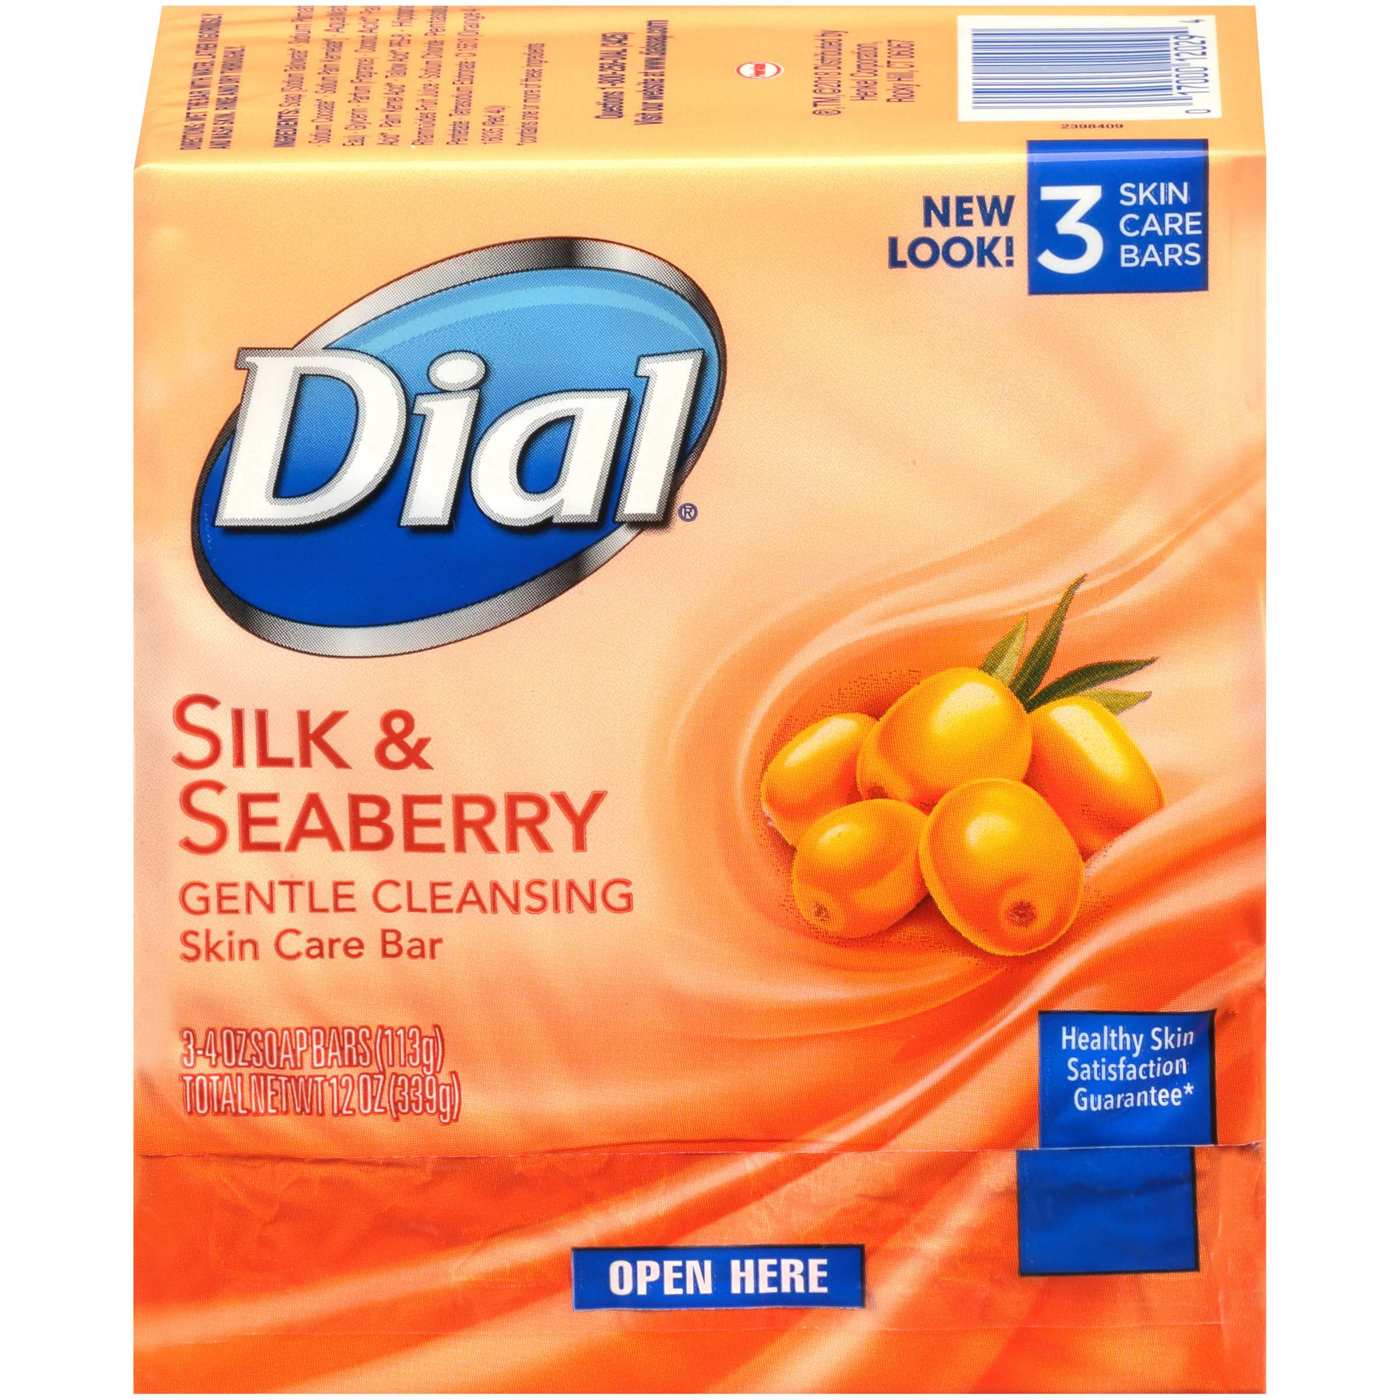 Dial Skin Care Bar Soap, Silk & Seaberry; image 1 of 4